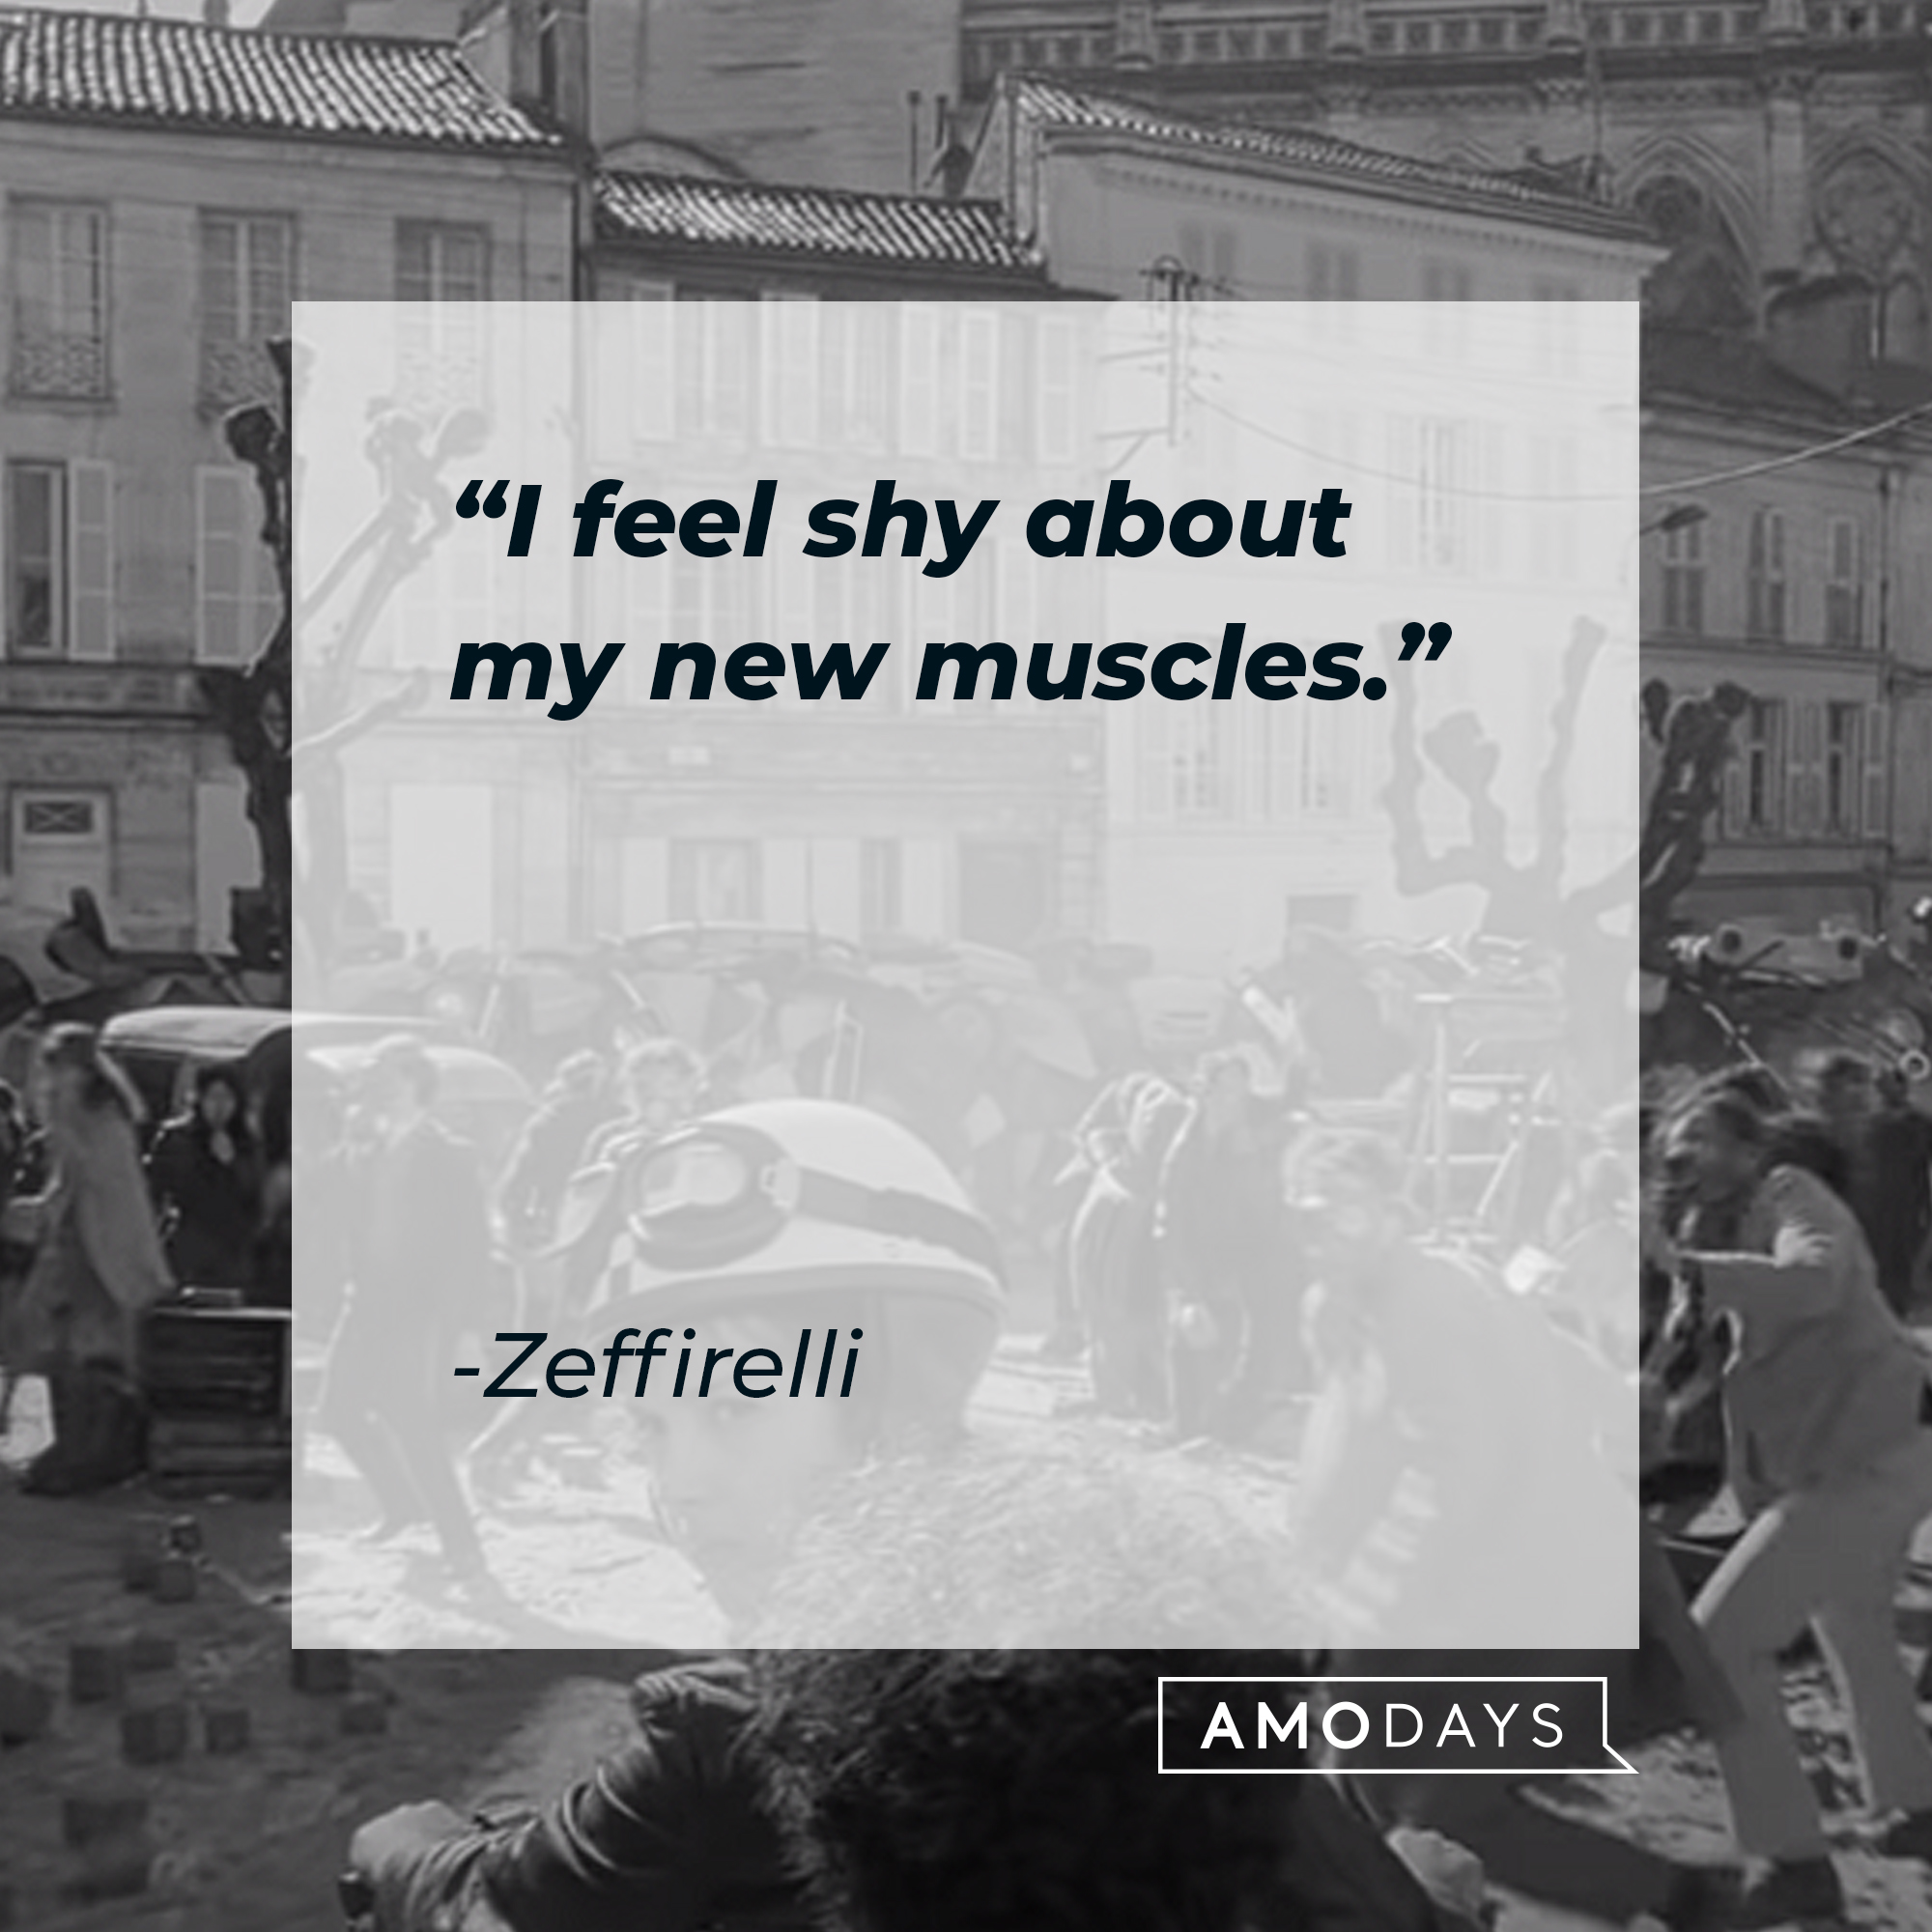 Zeffirelli's quote: "I feel shy about my new muscles." | Source: youtube.com/searchlightpictures